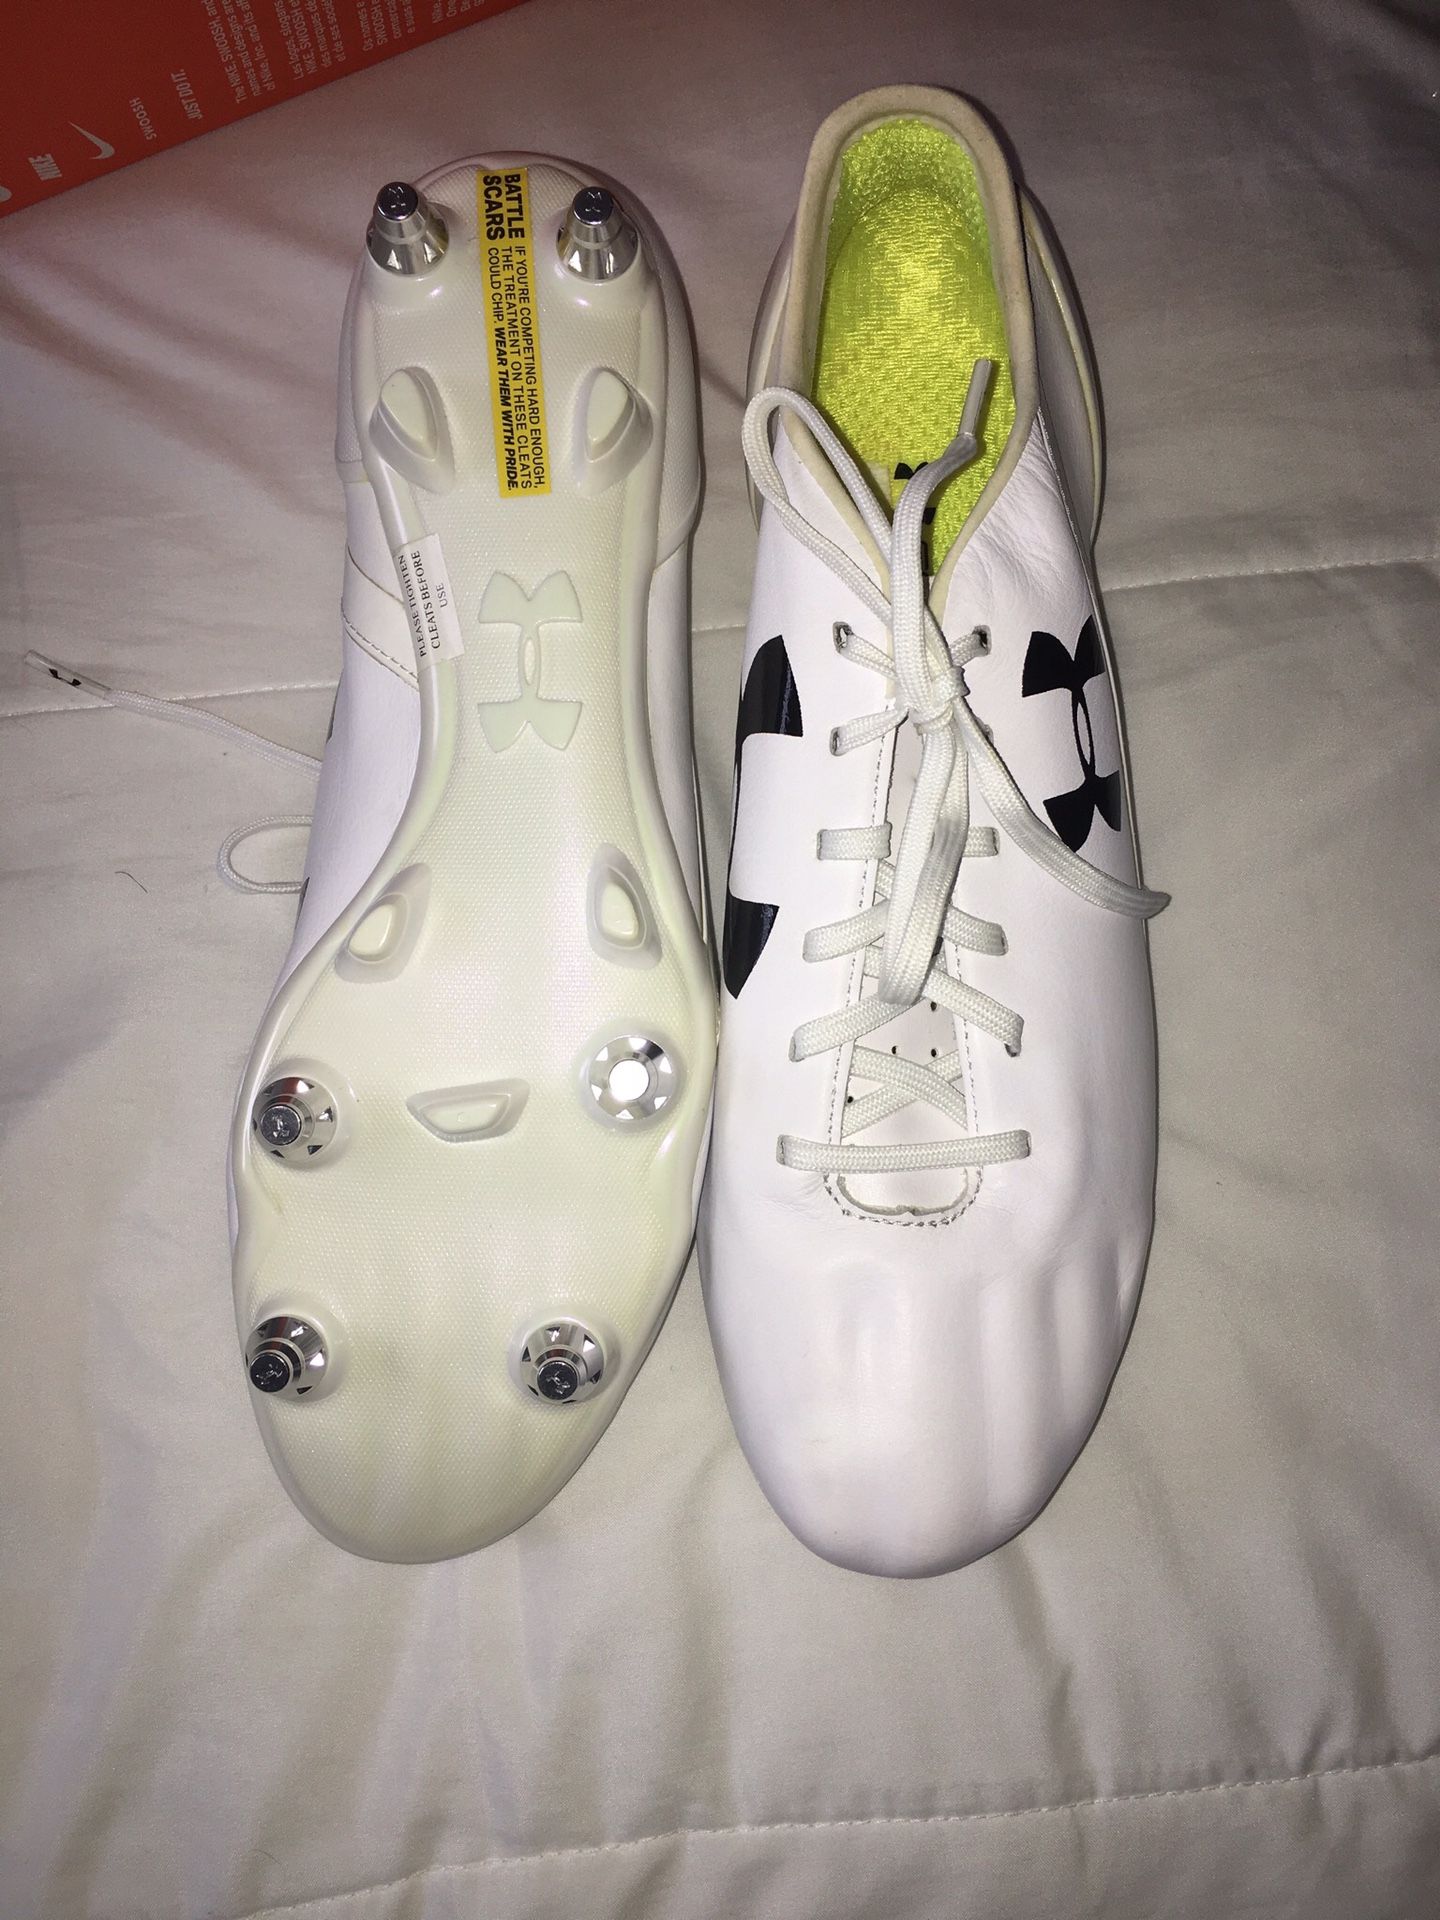 Under armor soccer cleats